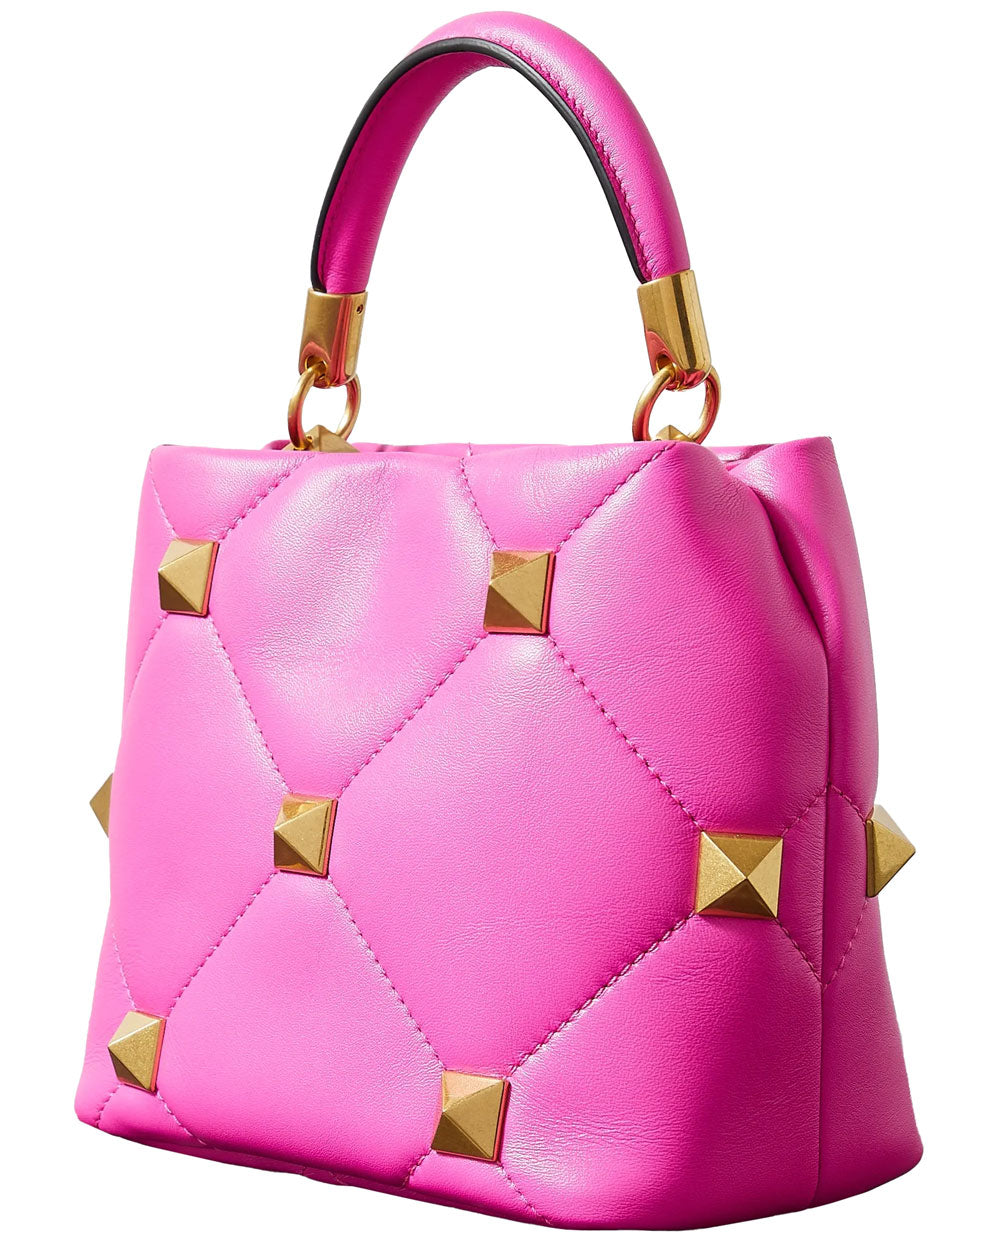 Roman Stud Quilted Top Handle Bag in Pink PP